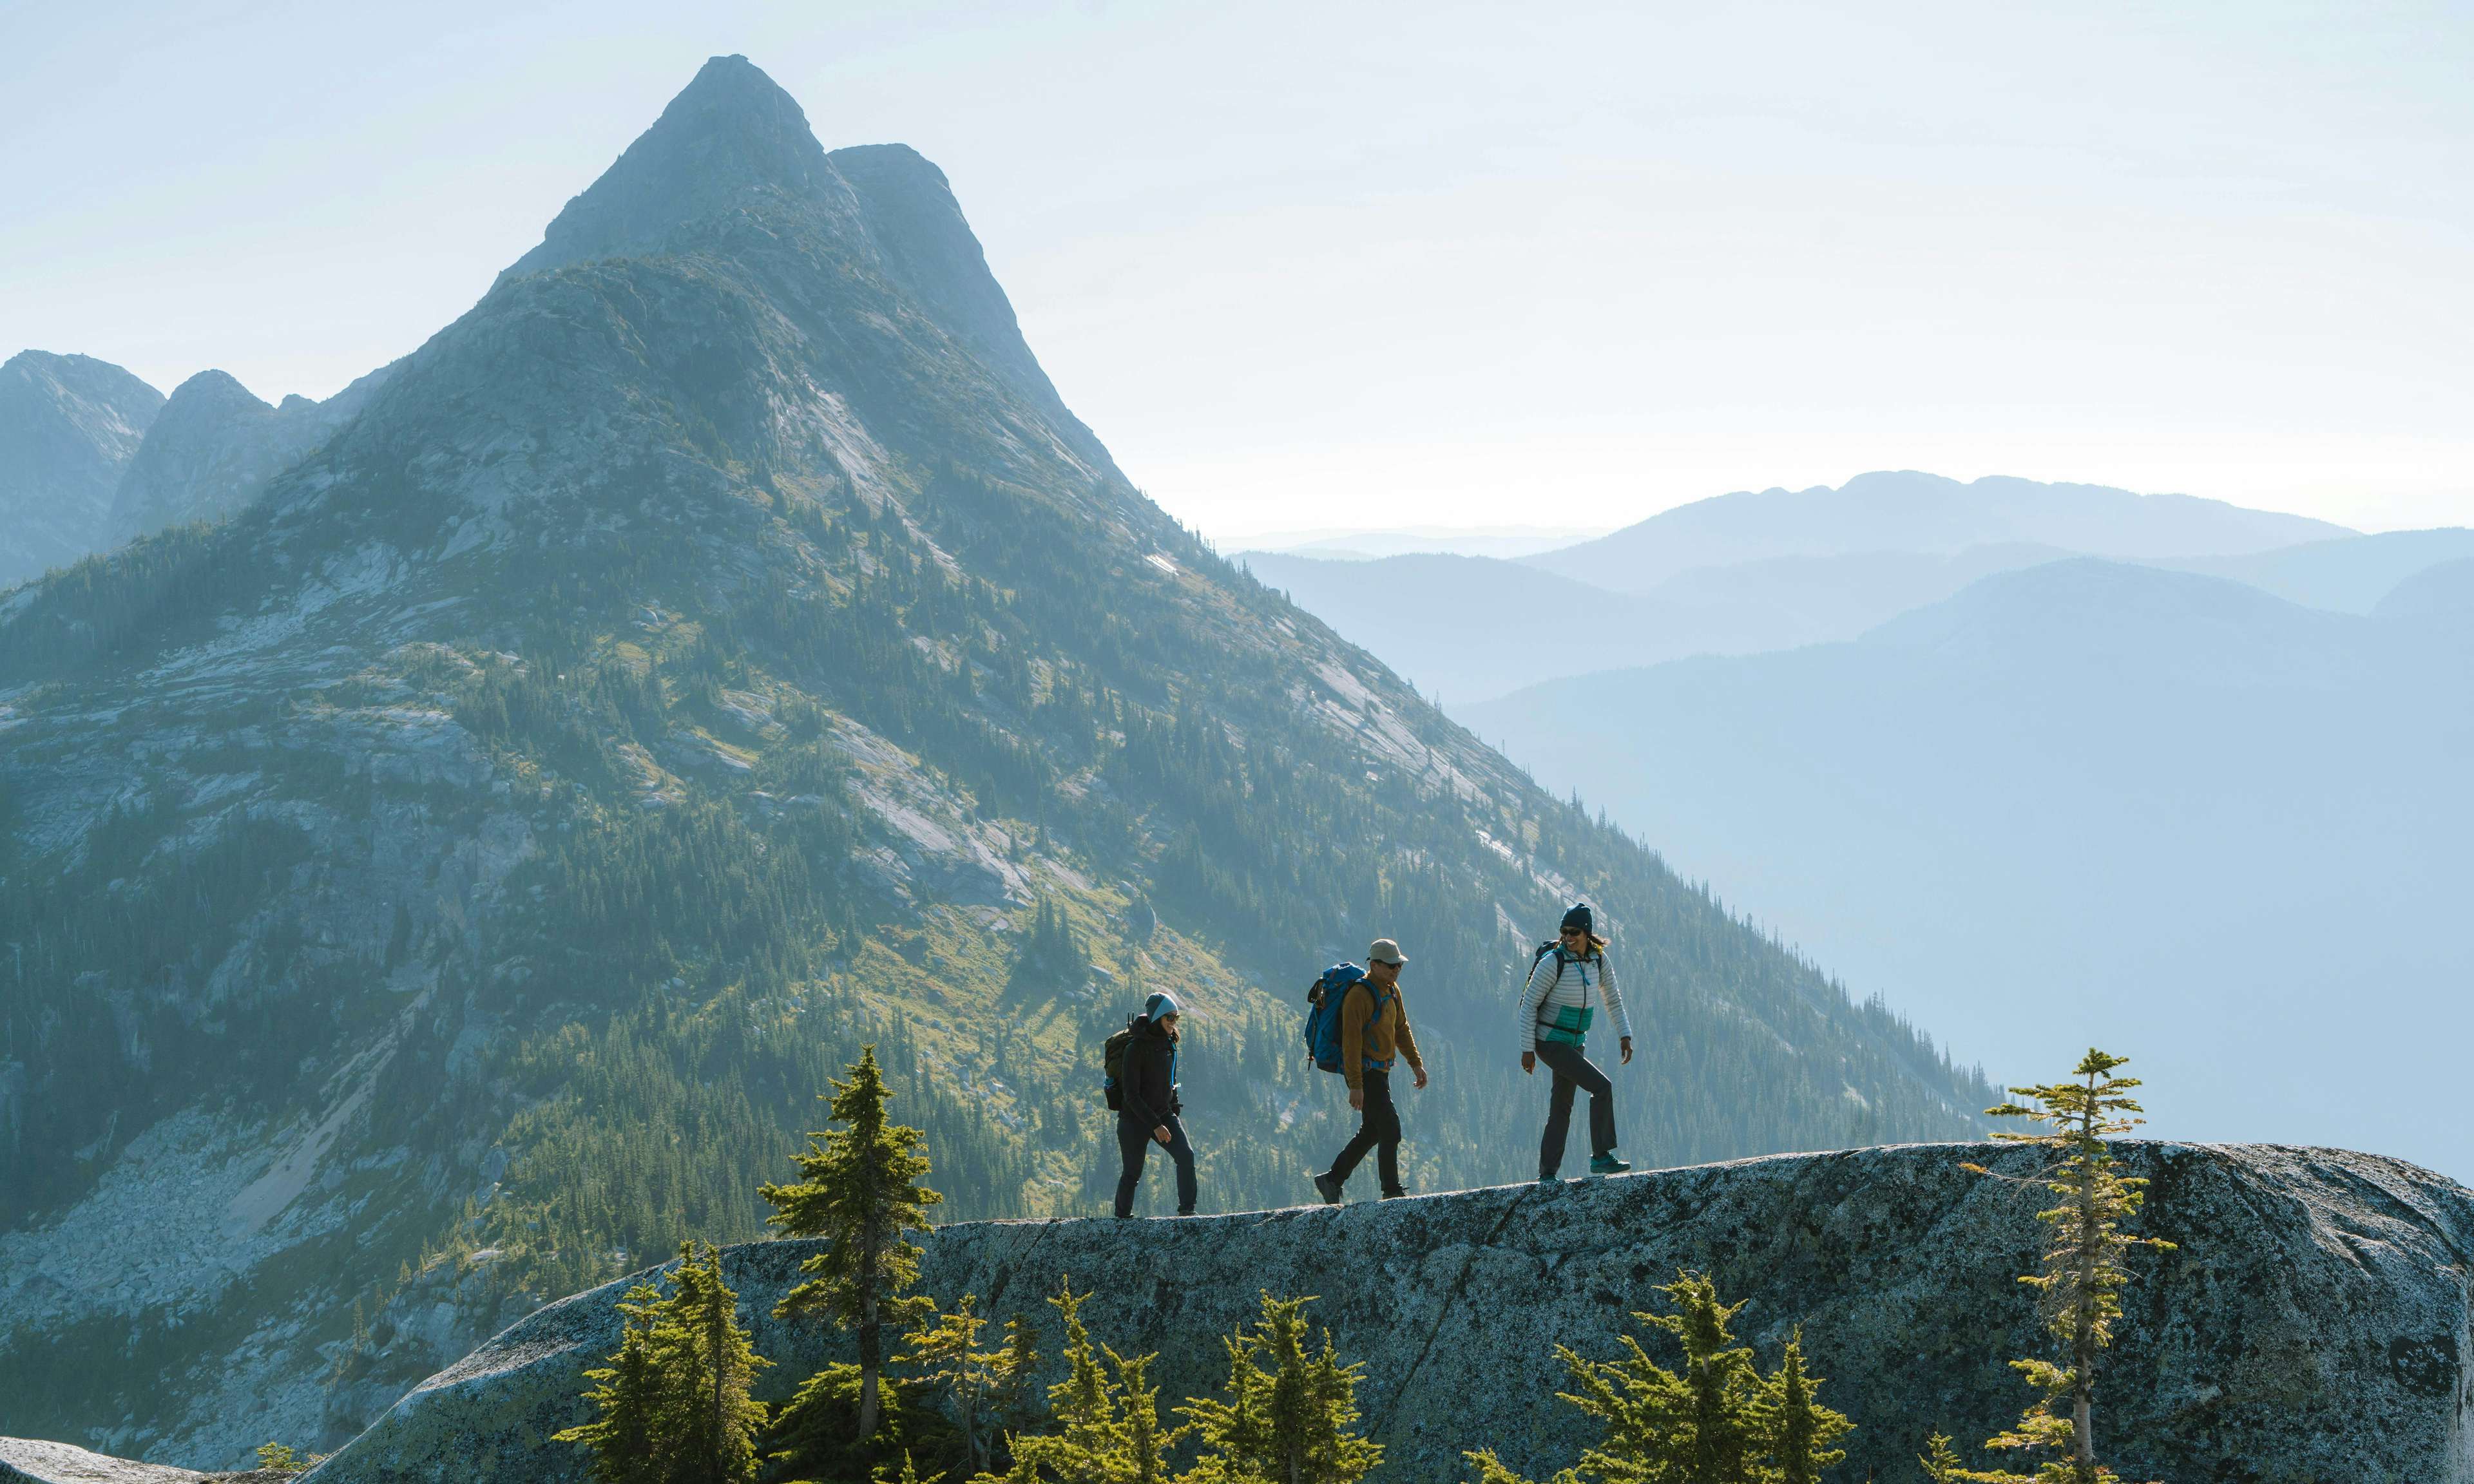 Three hikers on a ridge with a tall peak in the background